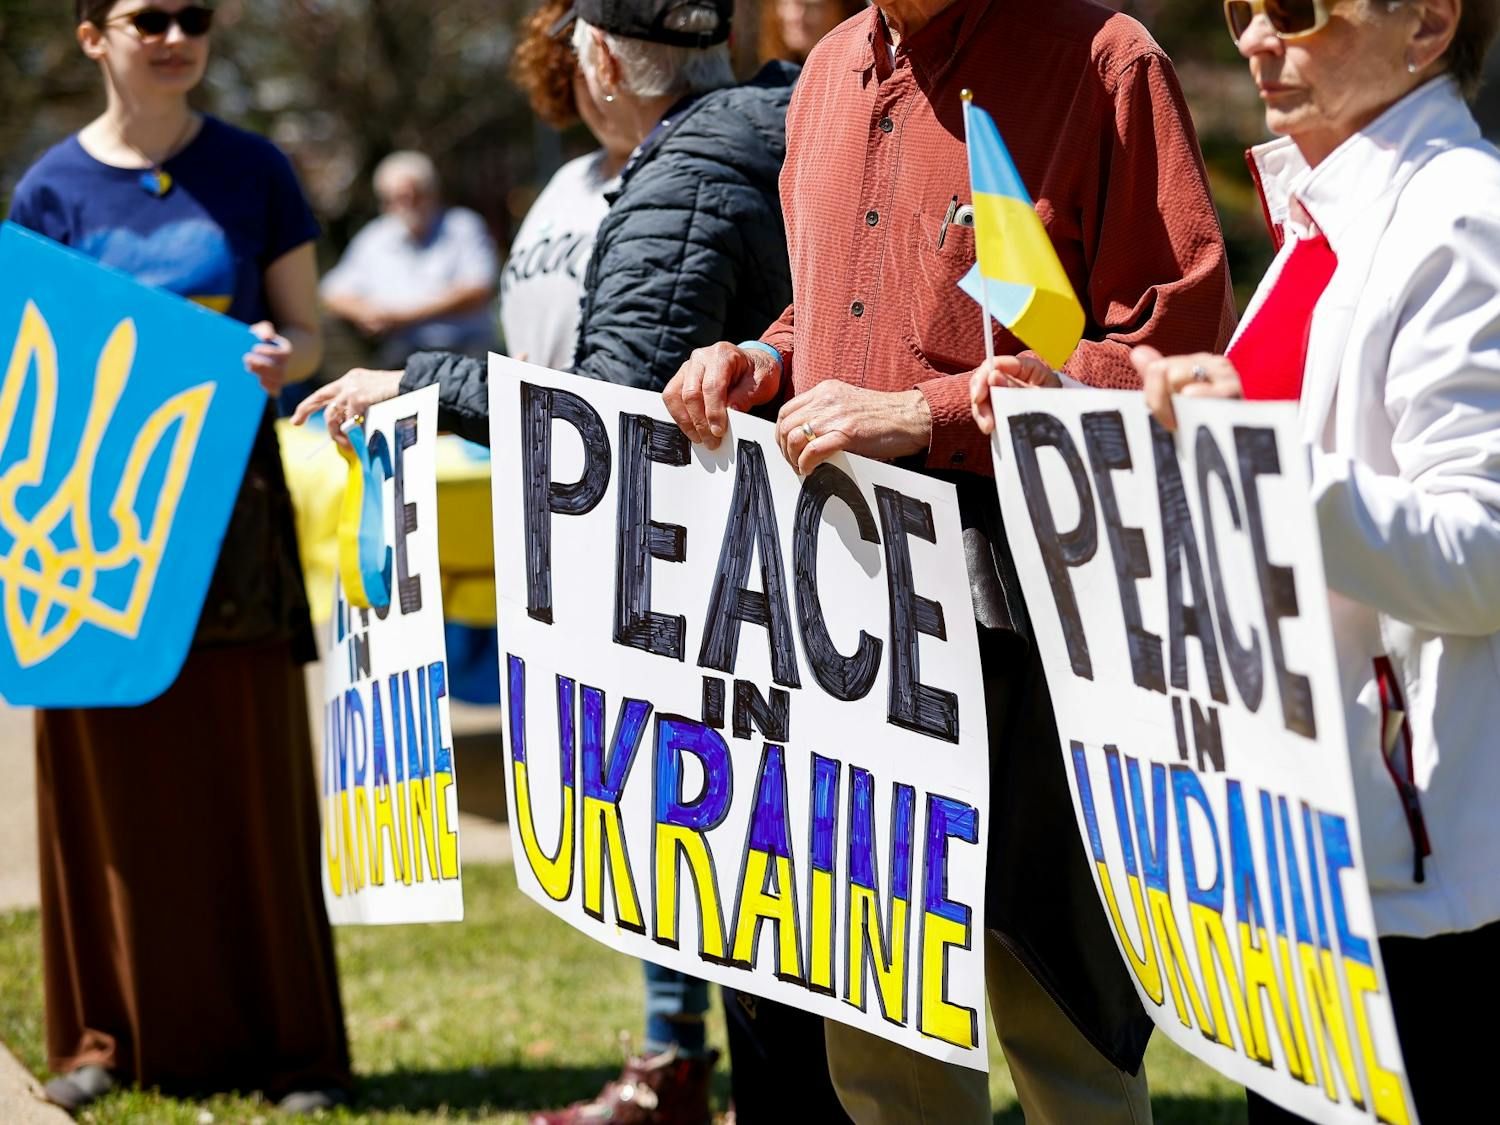 Attendees hold signs in support of Ukraine during the Stand with Ukraine Rally and March at the South Carolina Statehouse on April 2, 2022. The rally was held as a response to Russia's invasion of Ukraine.